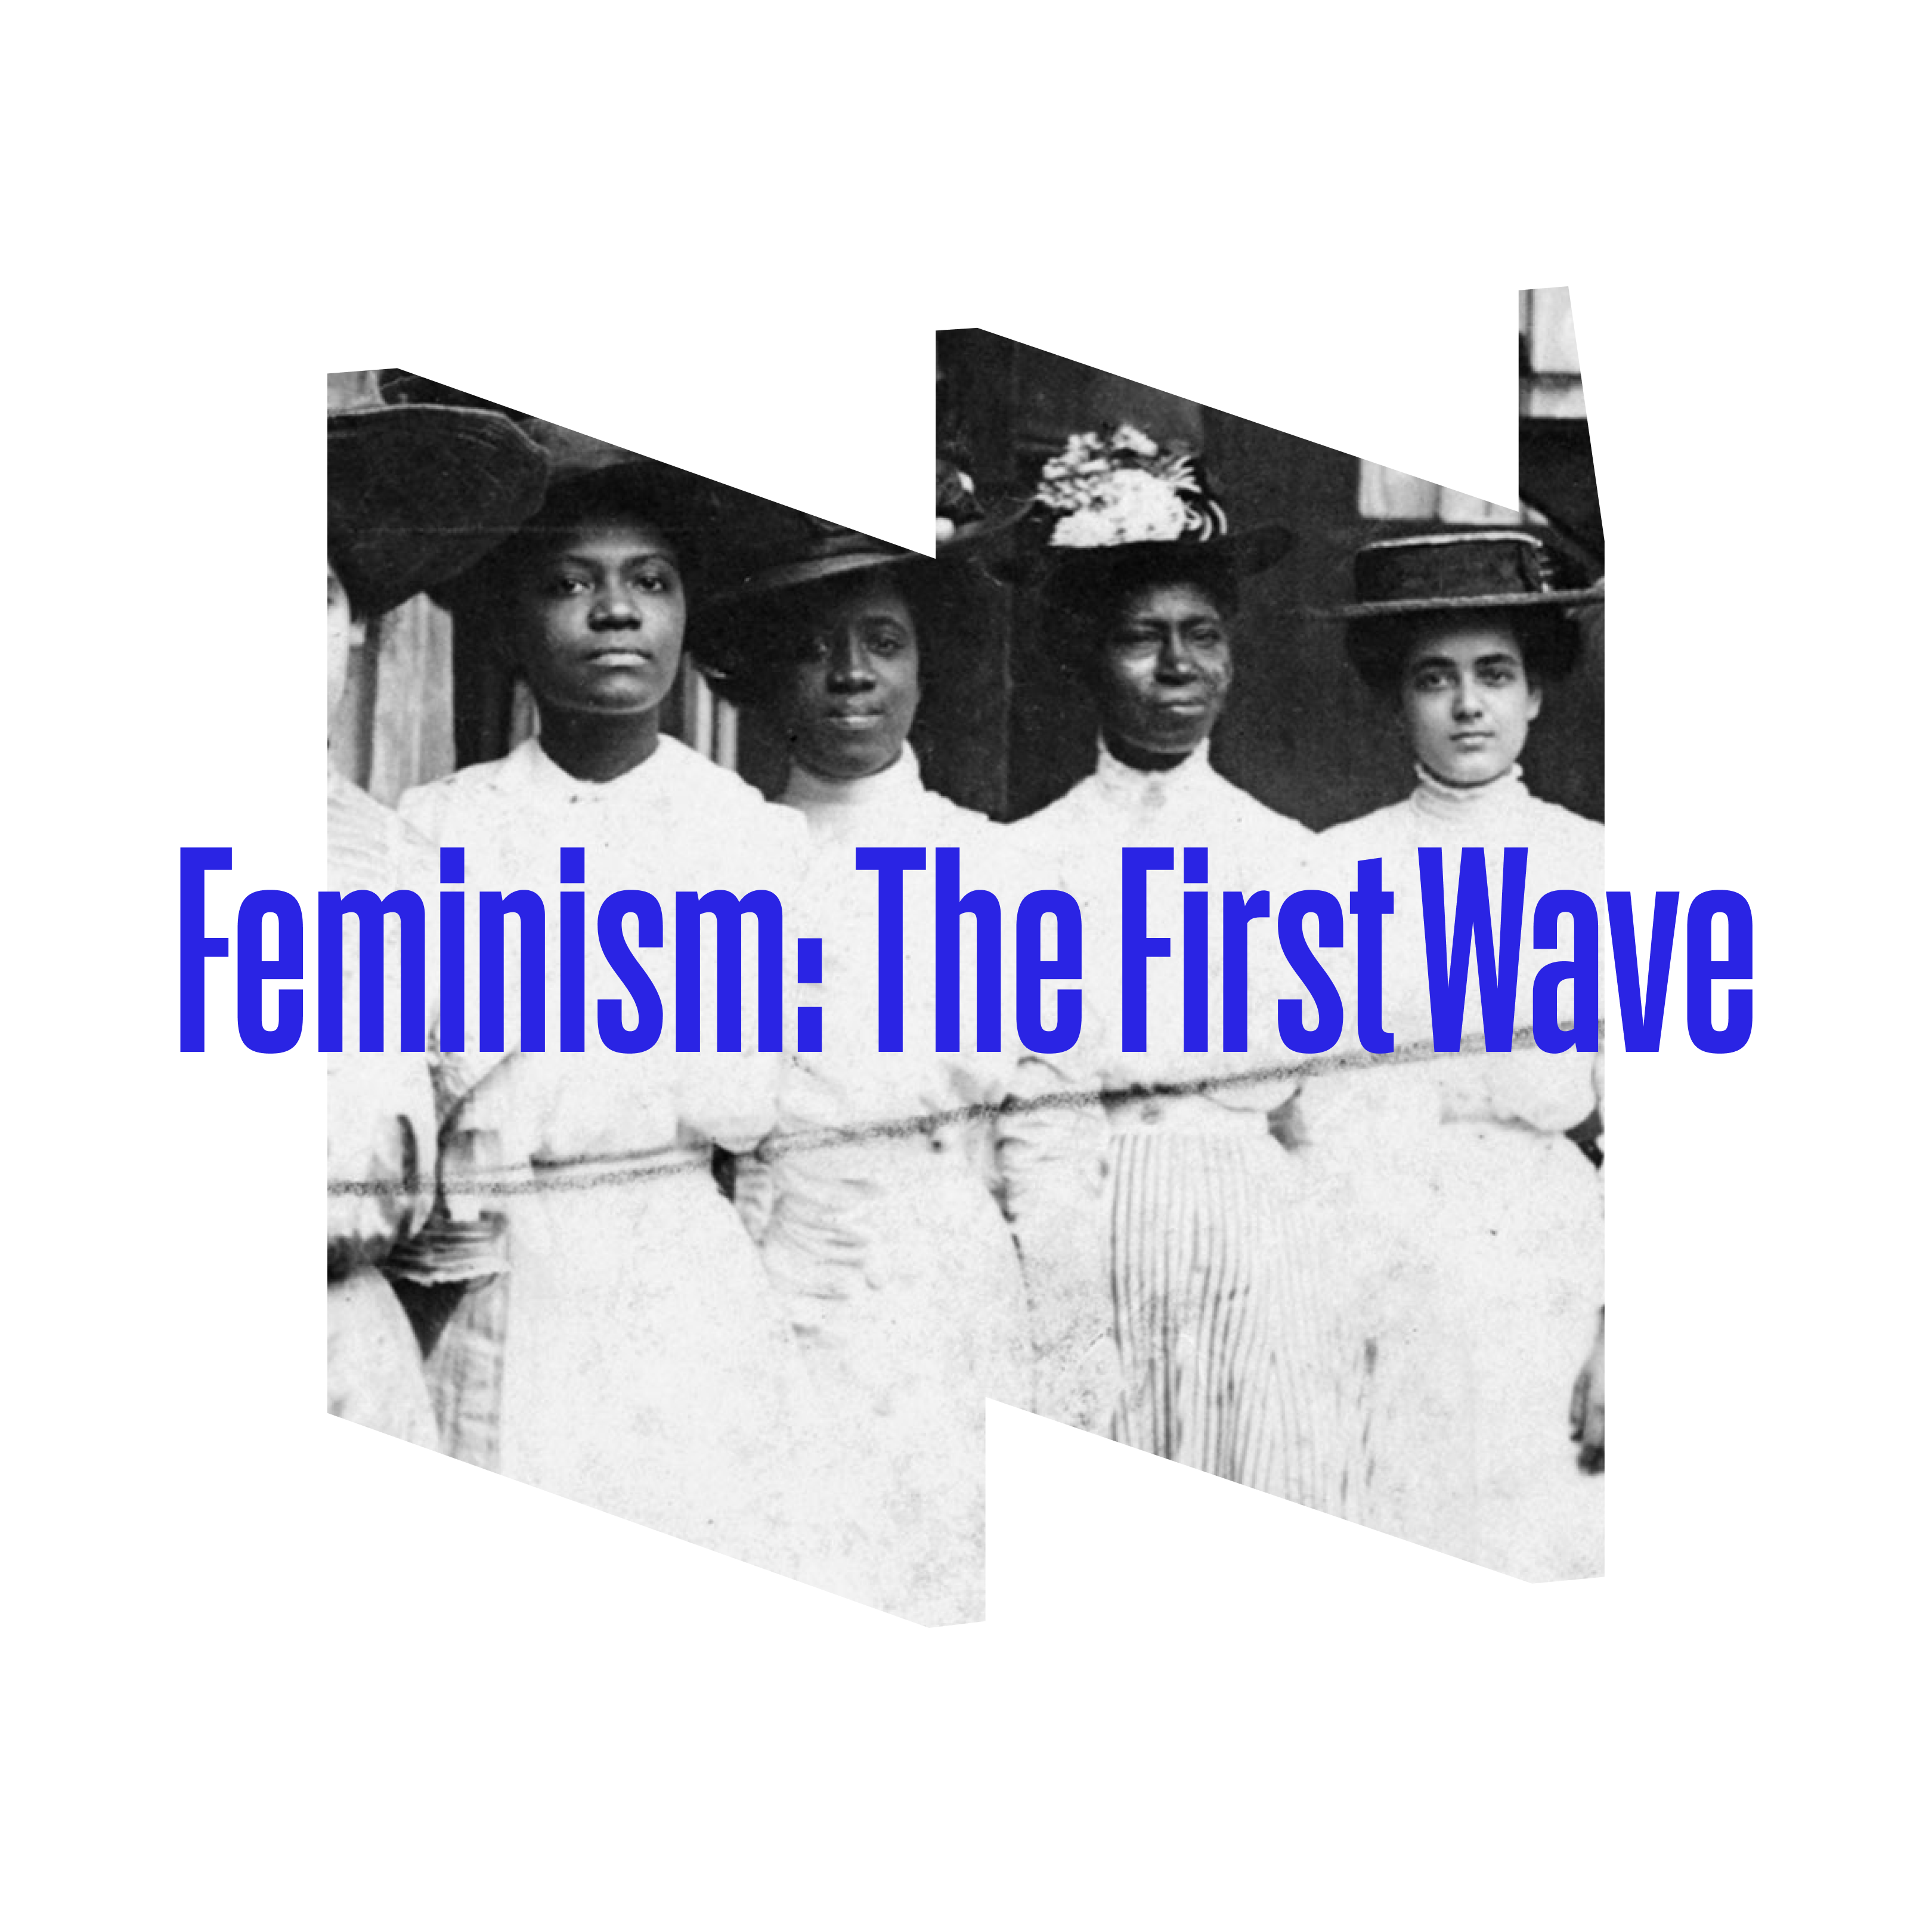 essay about first wave of feminism